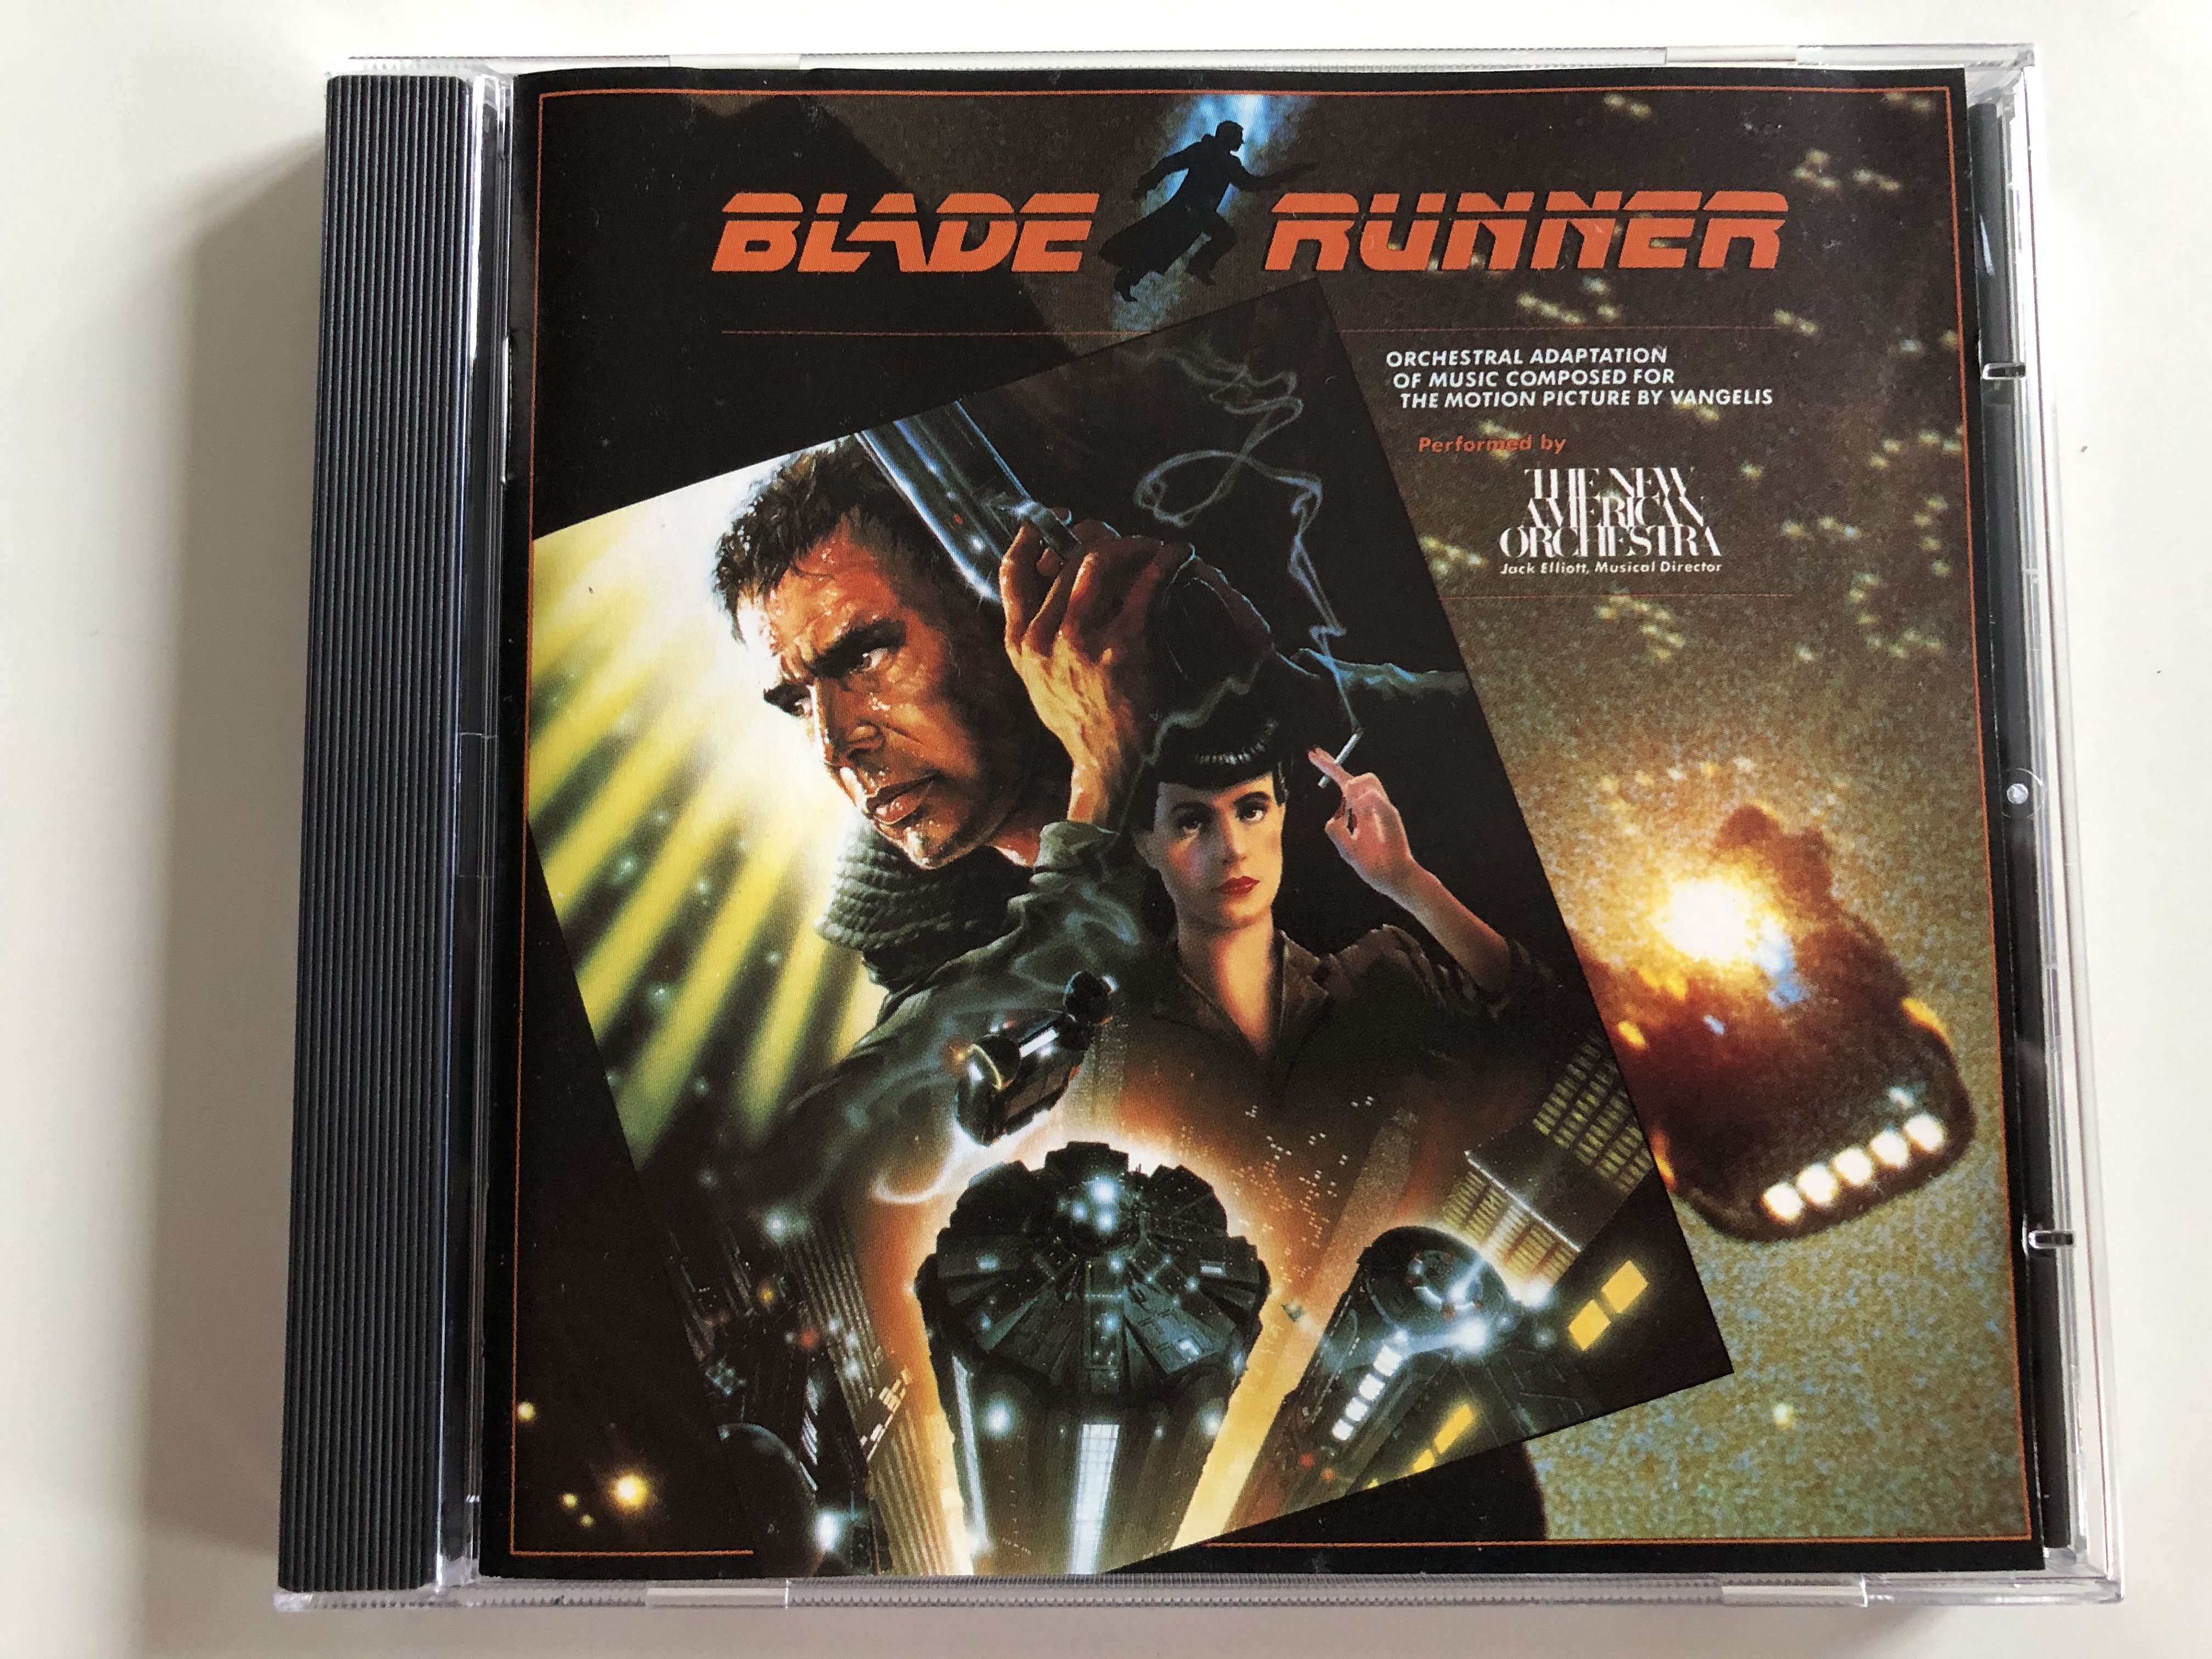 blade-runner-orchestral-adaptation-of-music-composed-for-the-motion-picture-by-vangelis-performed-by-the-new-american-orchestra-musical-director-jack-elliott-wea-international-inc.-audio-c-1-.jpg